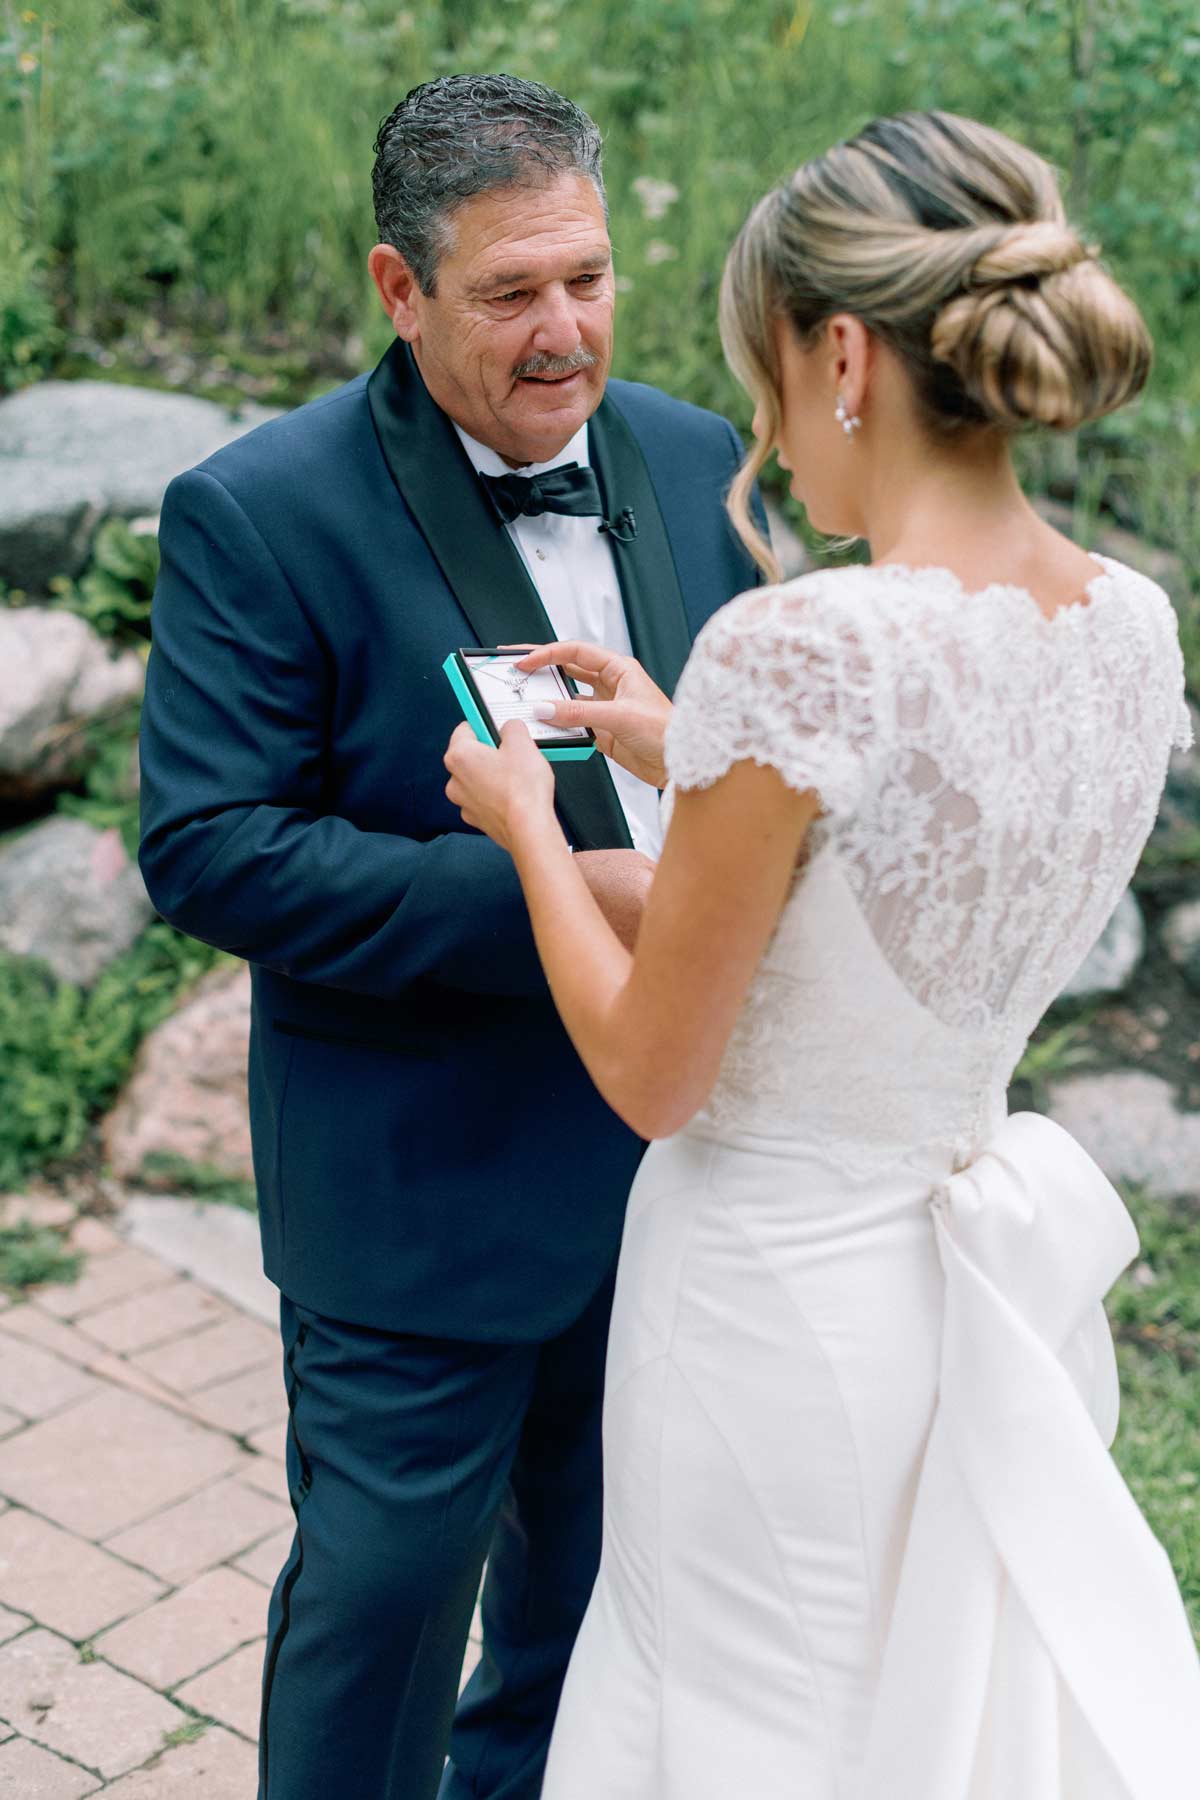 father gives daughter a cross necklace before her wedding ceremony